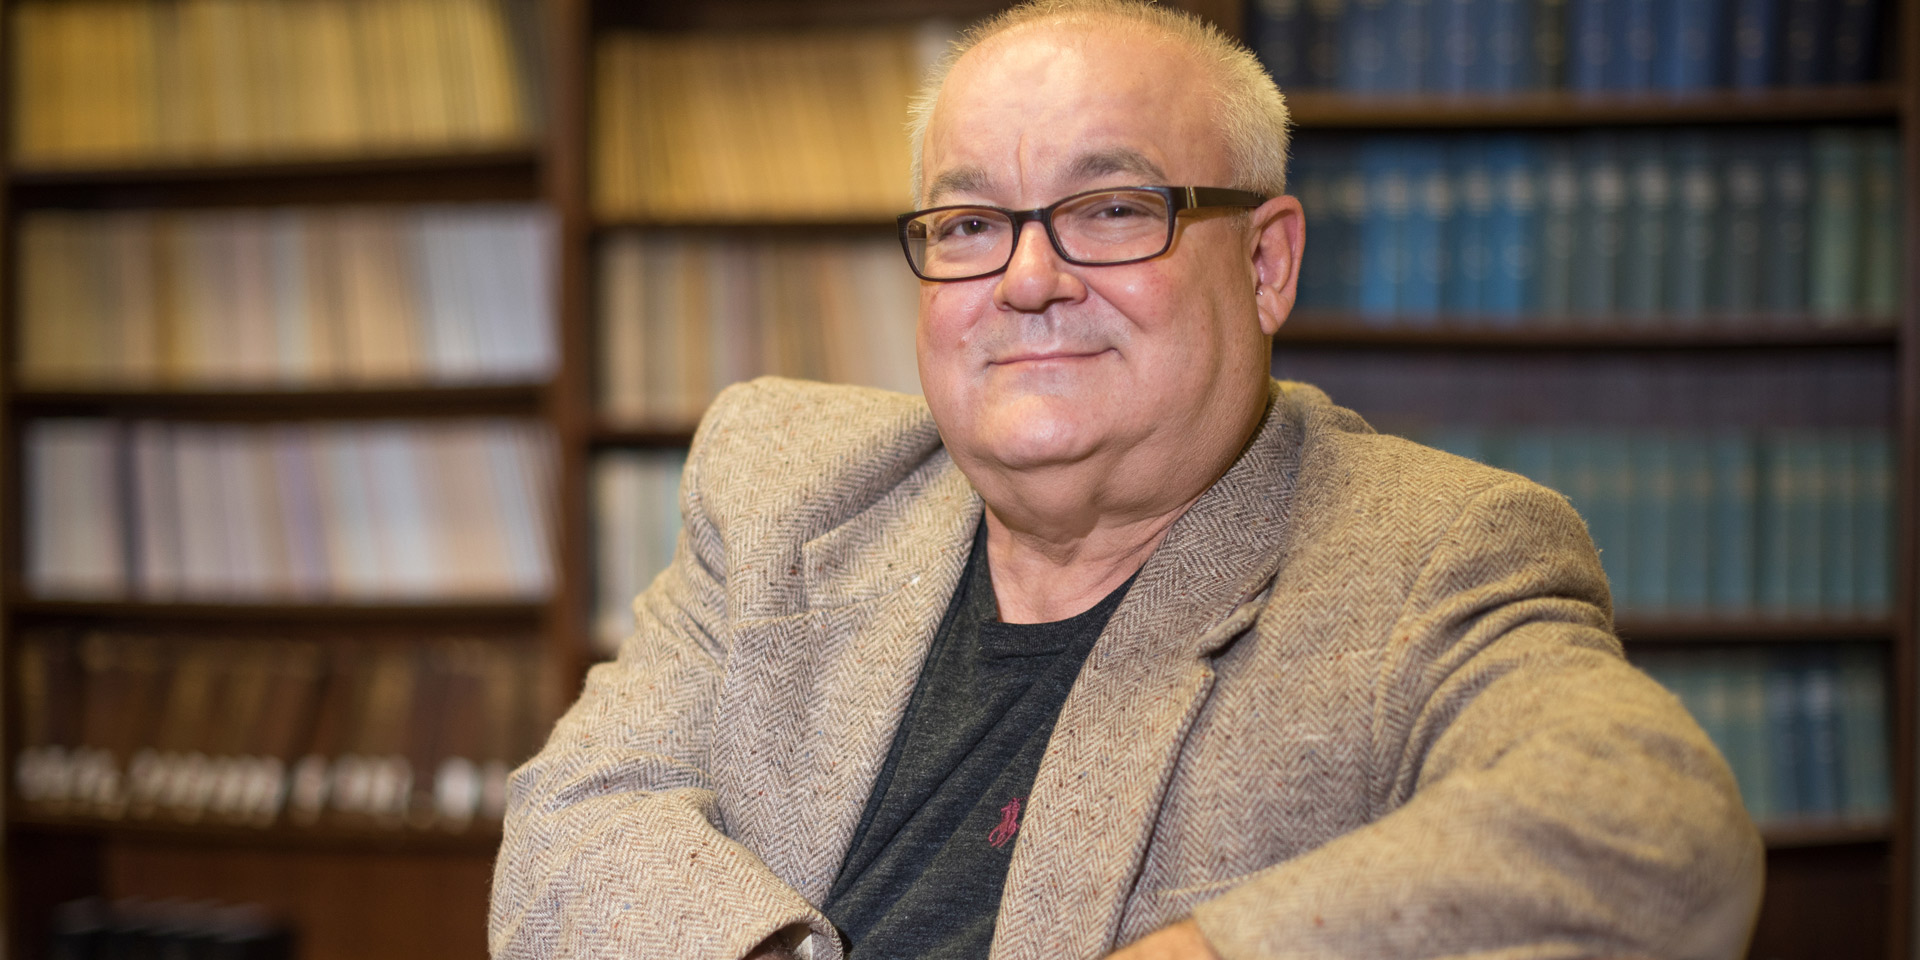 A history professor smiles for the camera in his office full of books